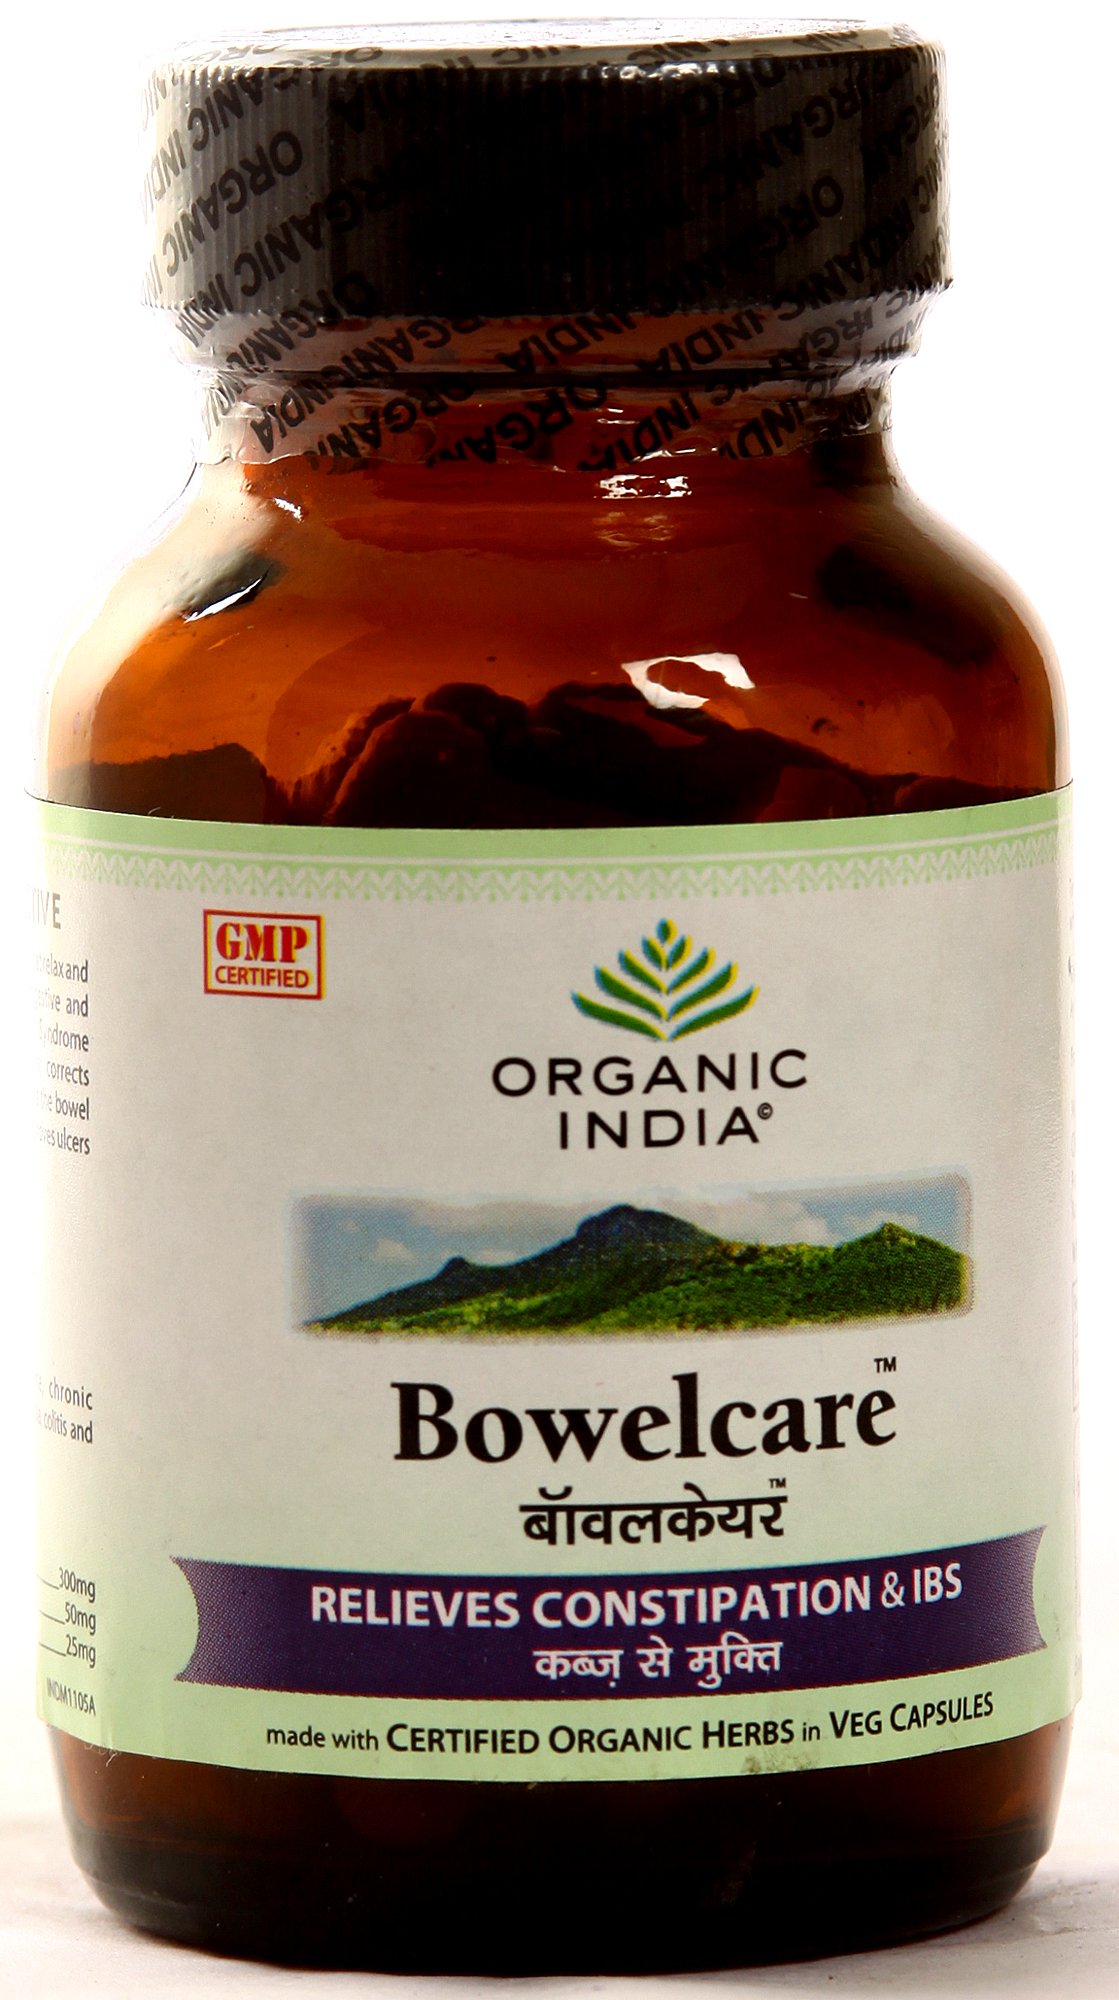 Bowelcare ( Relieves Constipation & IBS) - book cover